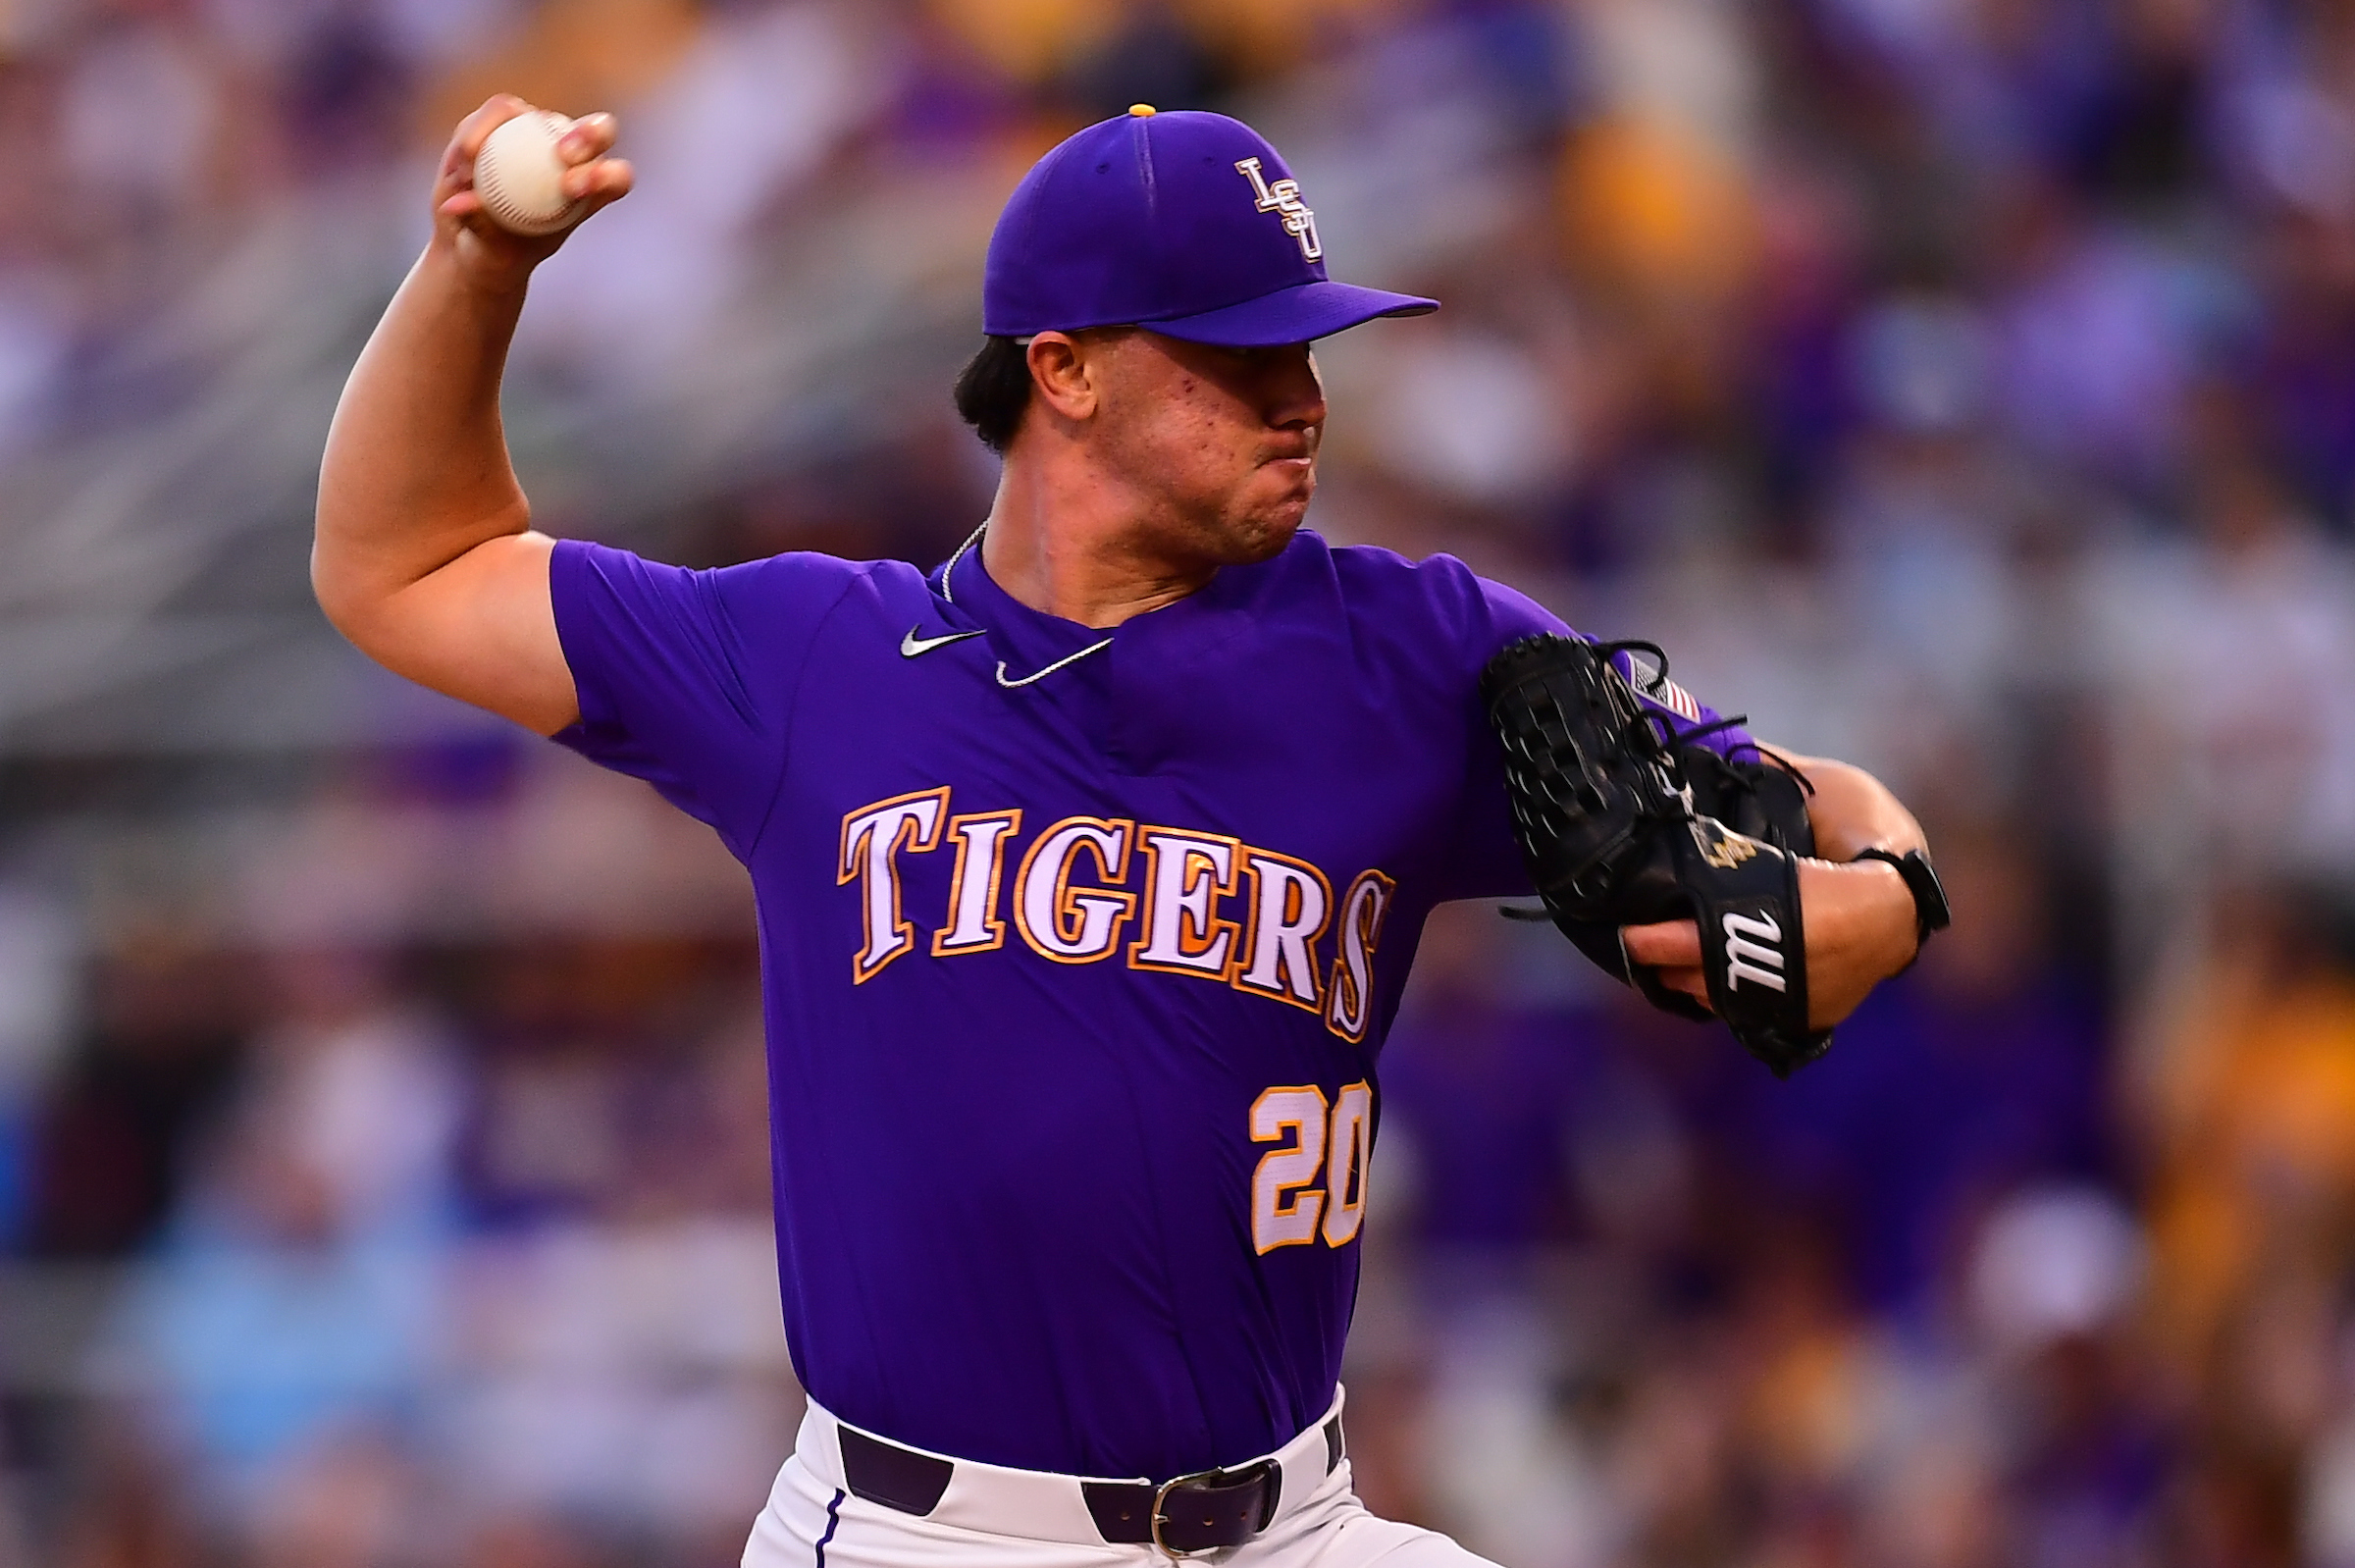 LSU’s Dylan Crews and Paul Skenes named SEC Player of the Year and SEC